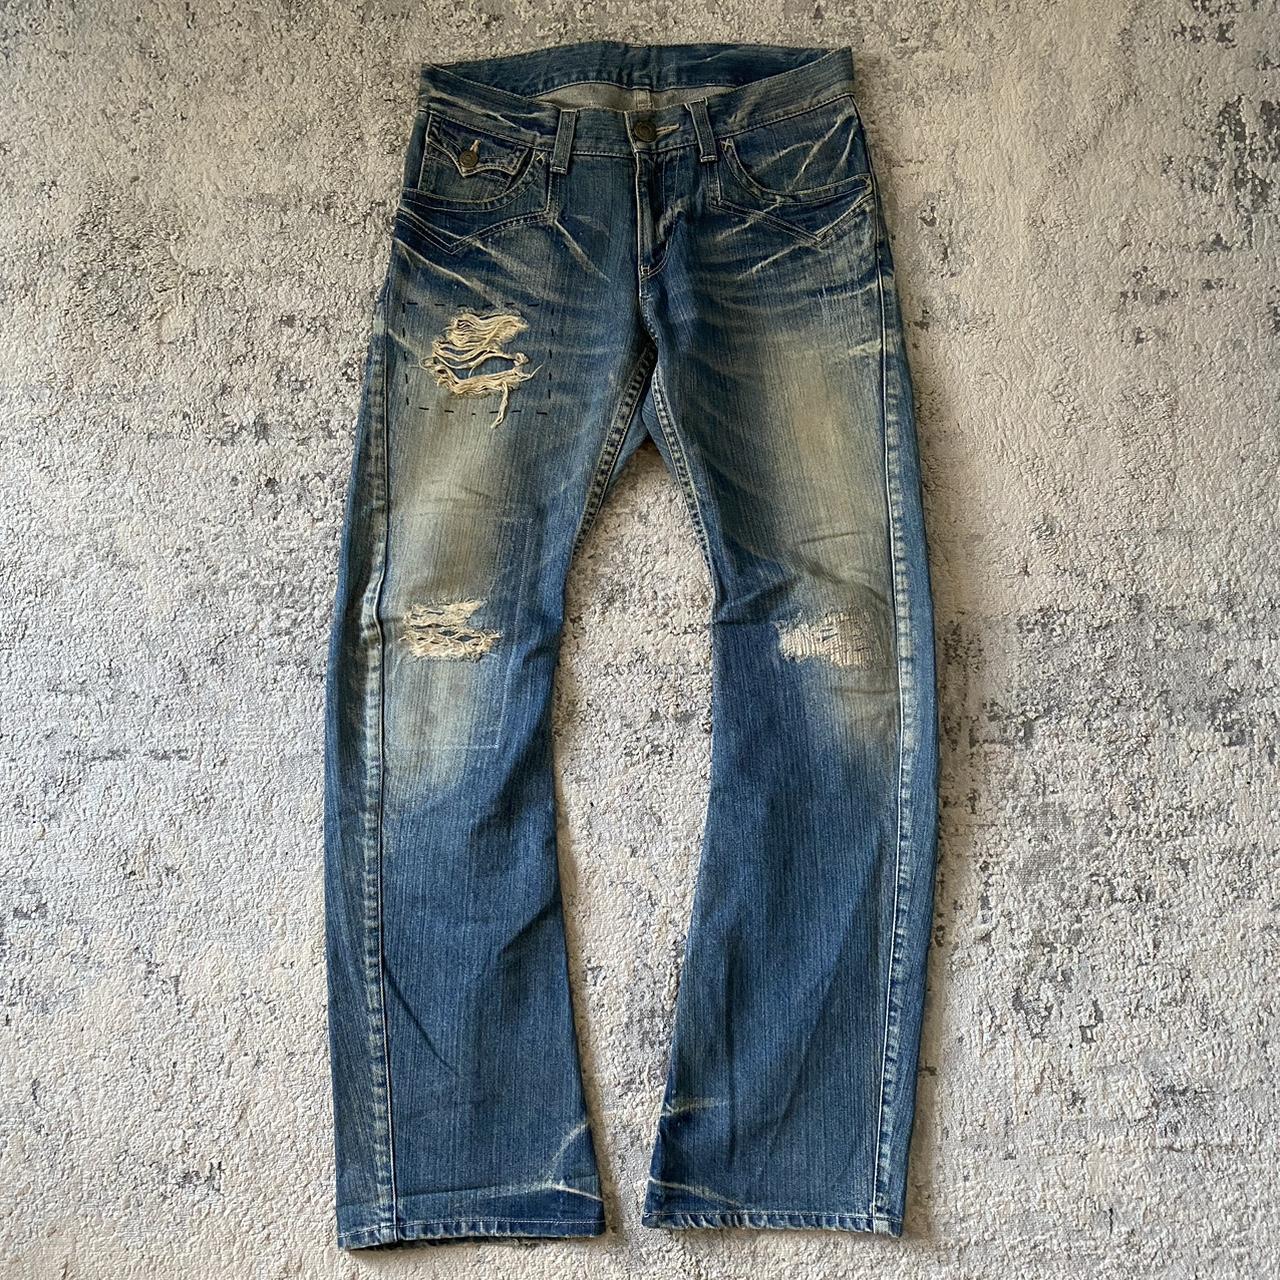 Rattle Trap - Curved Leg Flared Jeans Size 32... - Depop